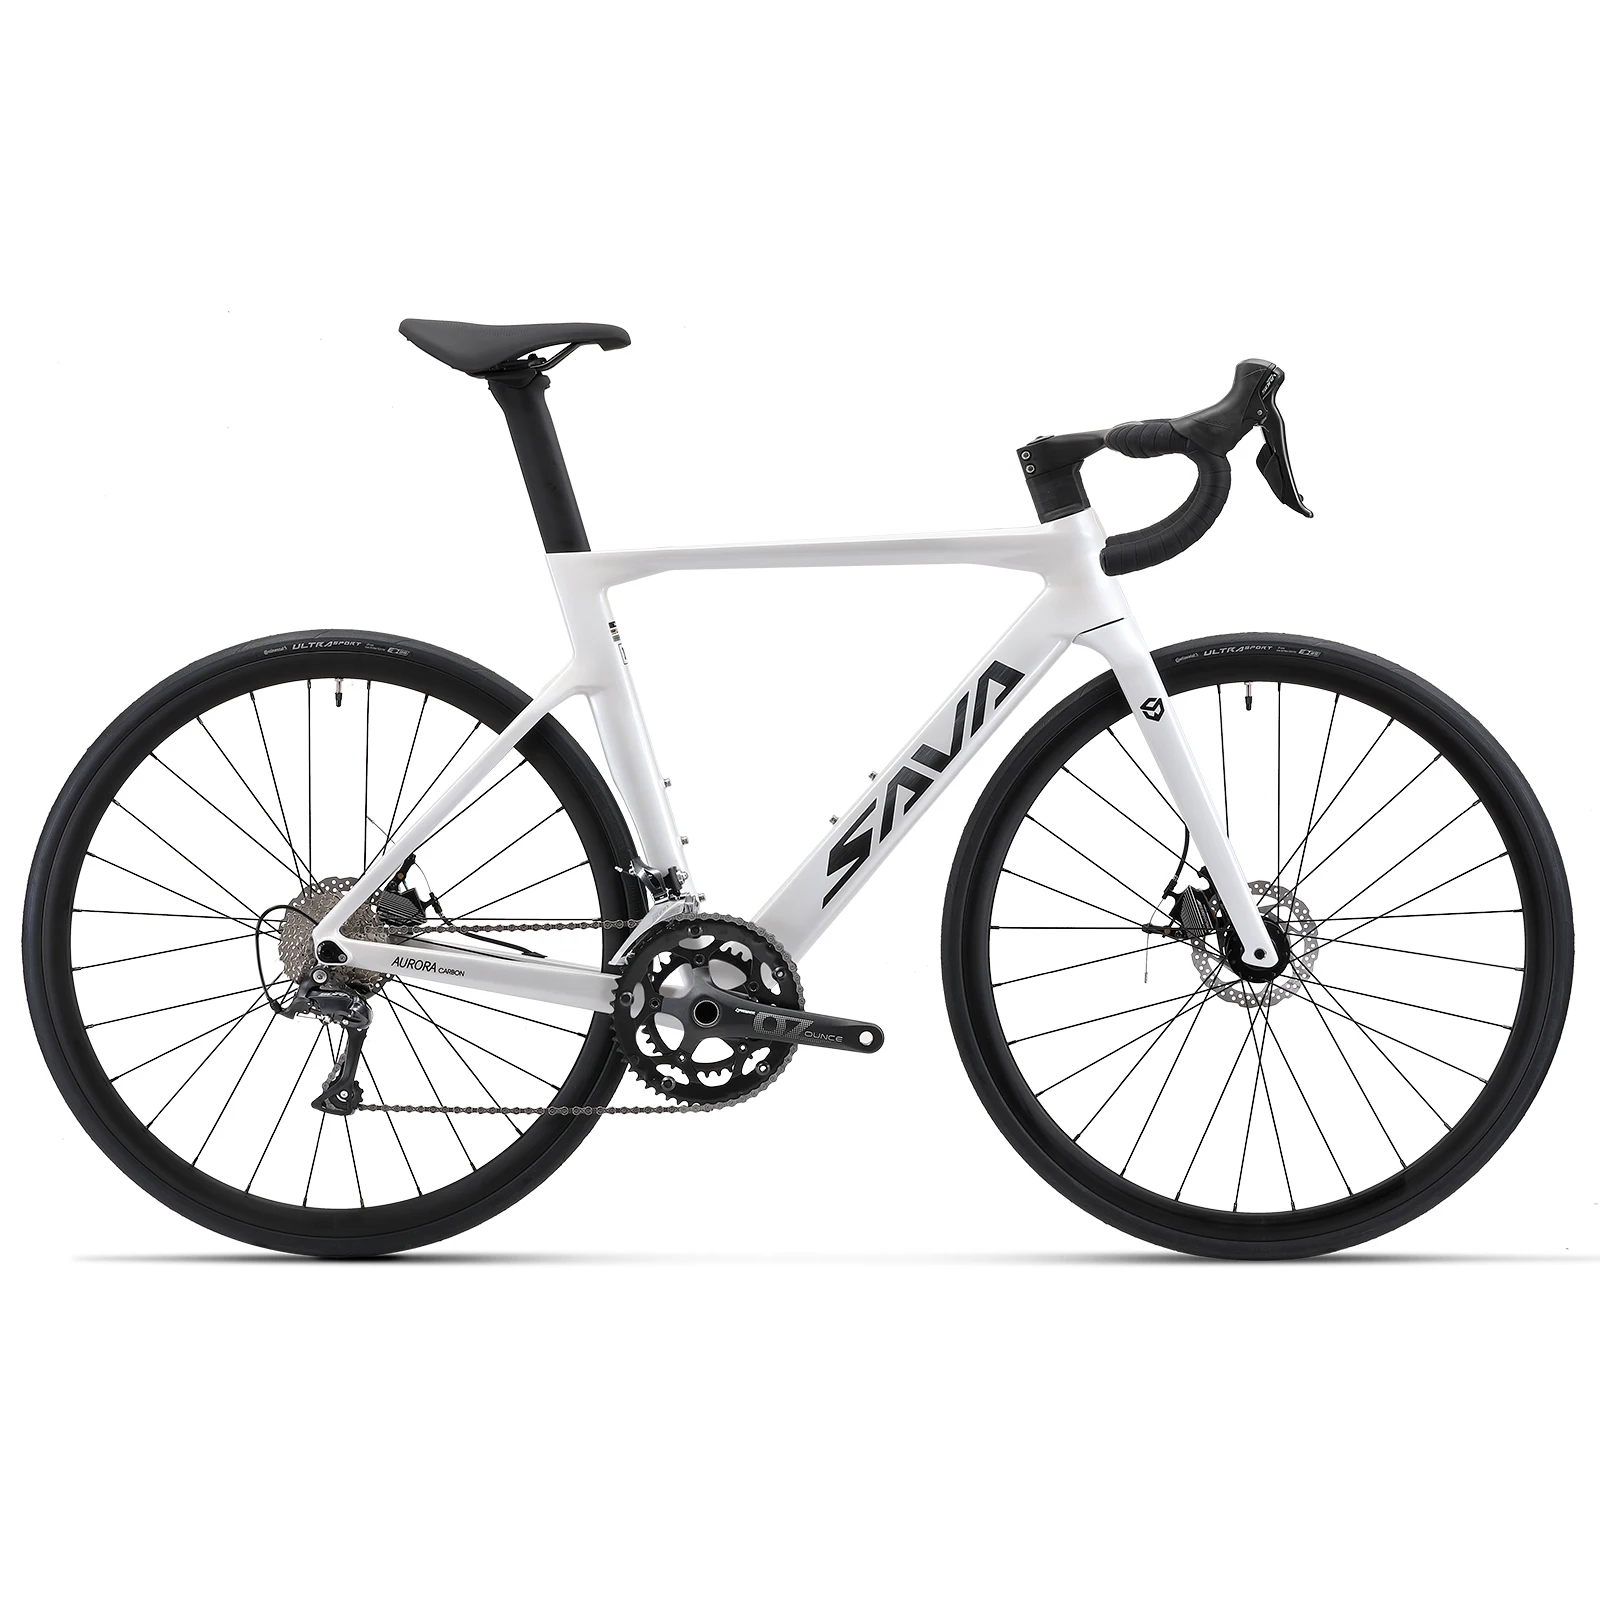 

Bicycle Road Bike 700c Carbon Fibre Frame Adult Road Bike with 18/22 speeds Group Set Hydraulic Disc Brake